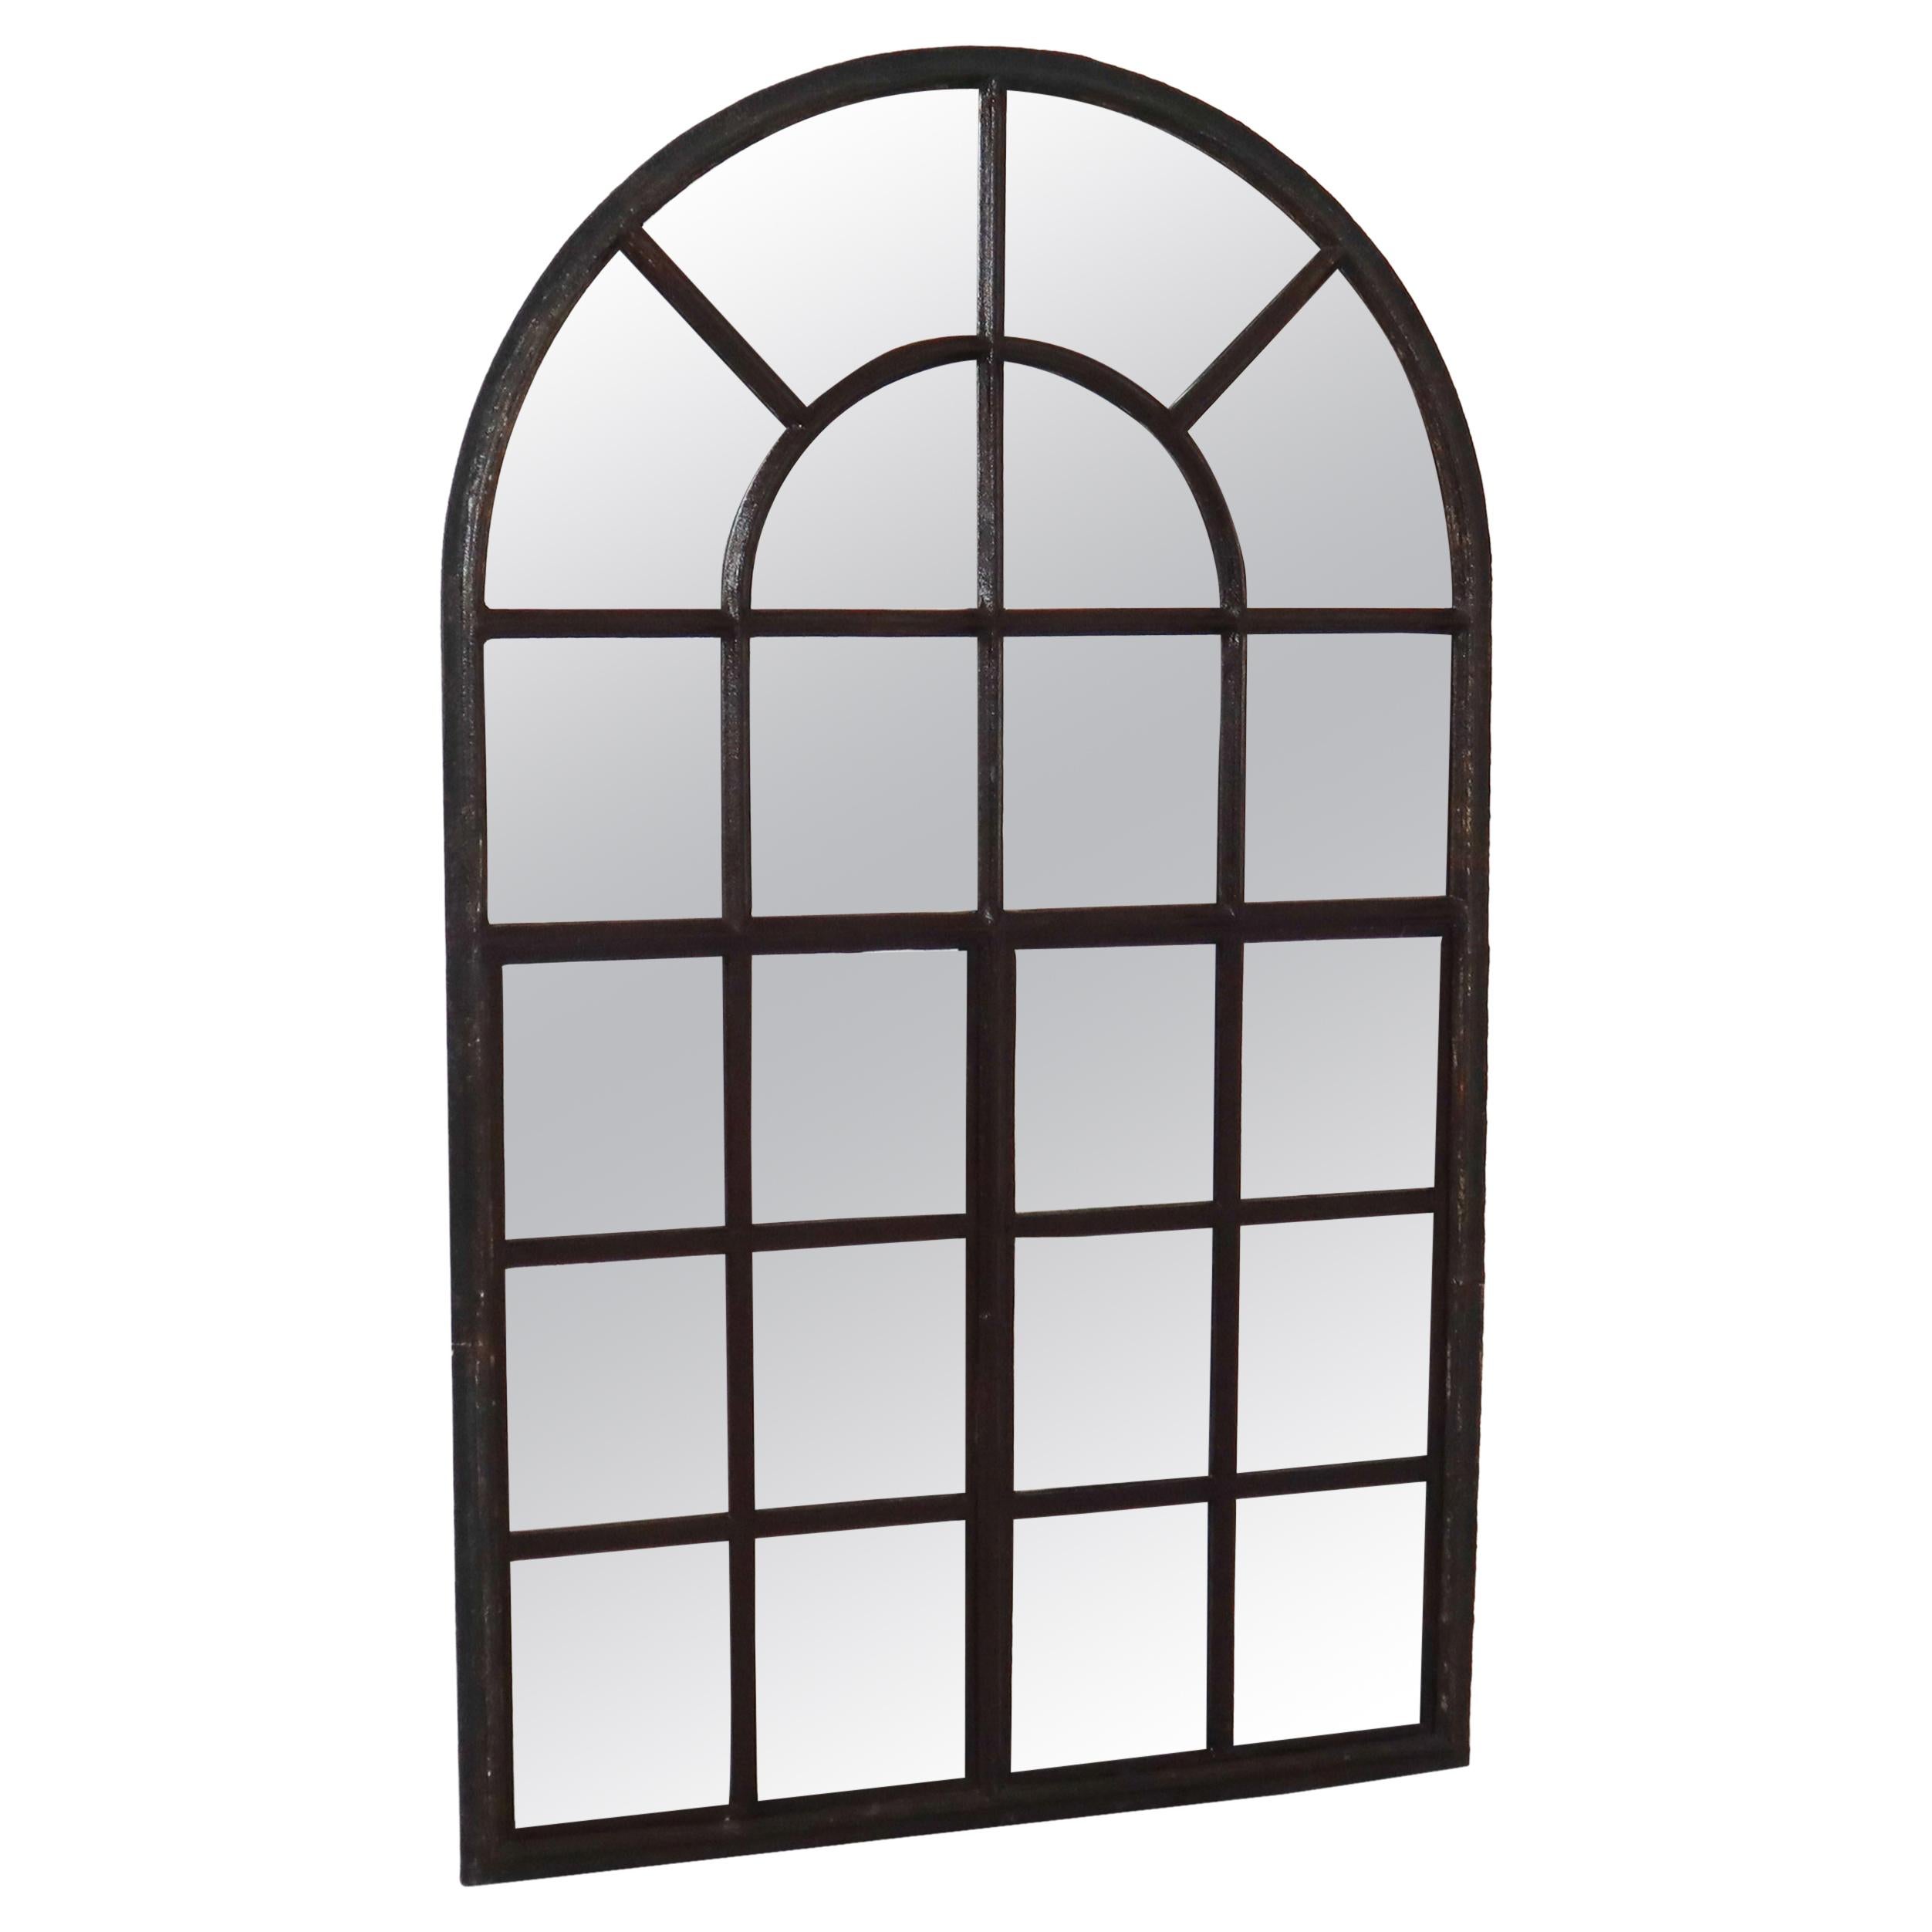 Large Early Cast Iron Arched Industrial Window with Mirror, France, 1800s